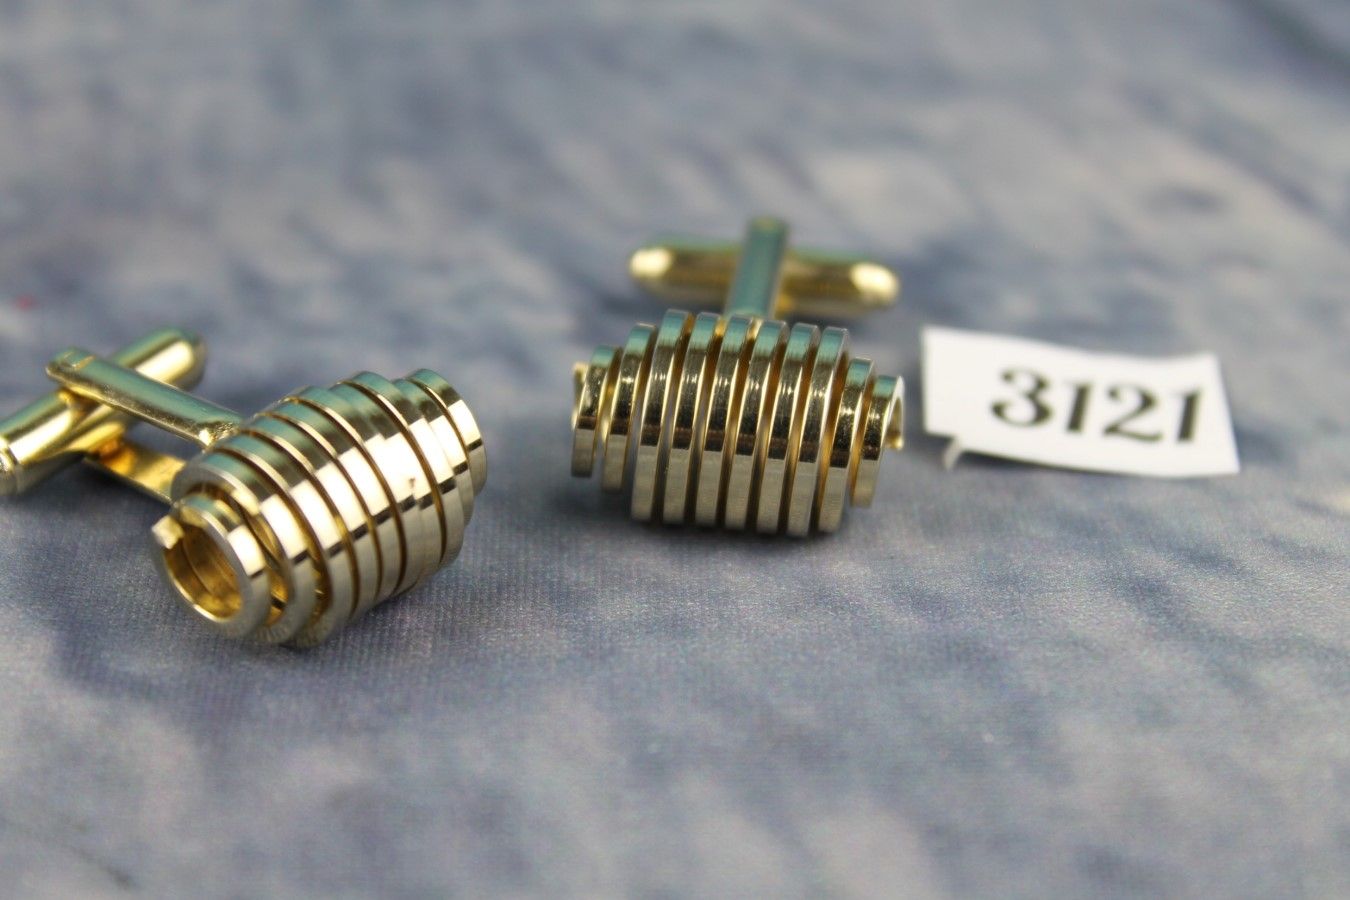 Vintage SHIELDS Gold Metal Cufflinks Coils Sprigs Squeezable